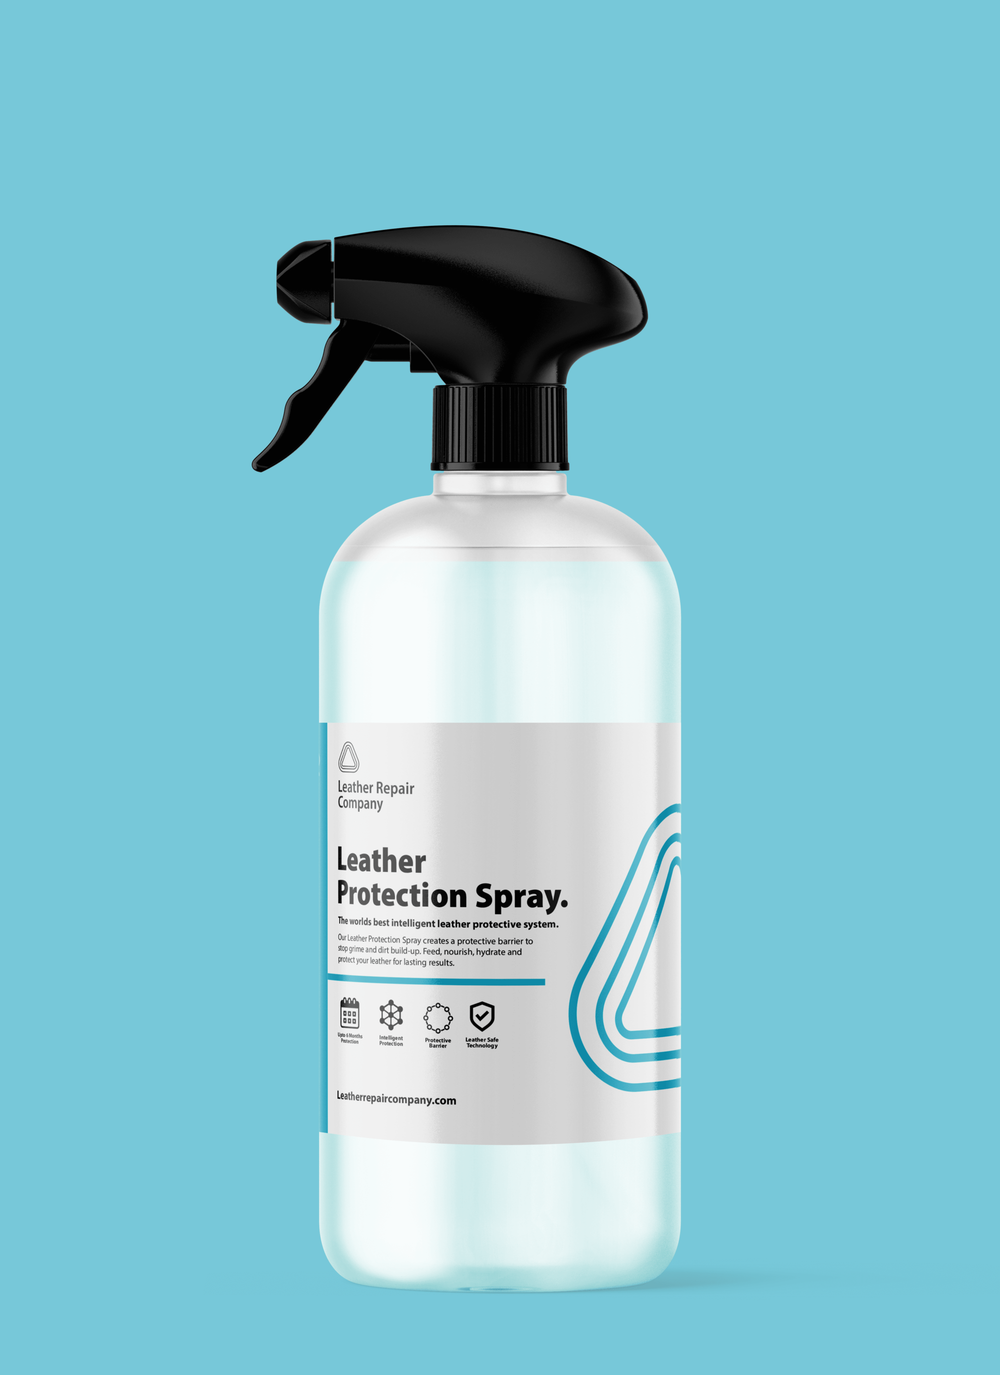 Leather Protection Spray